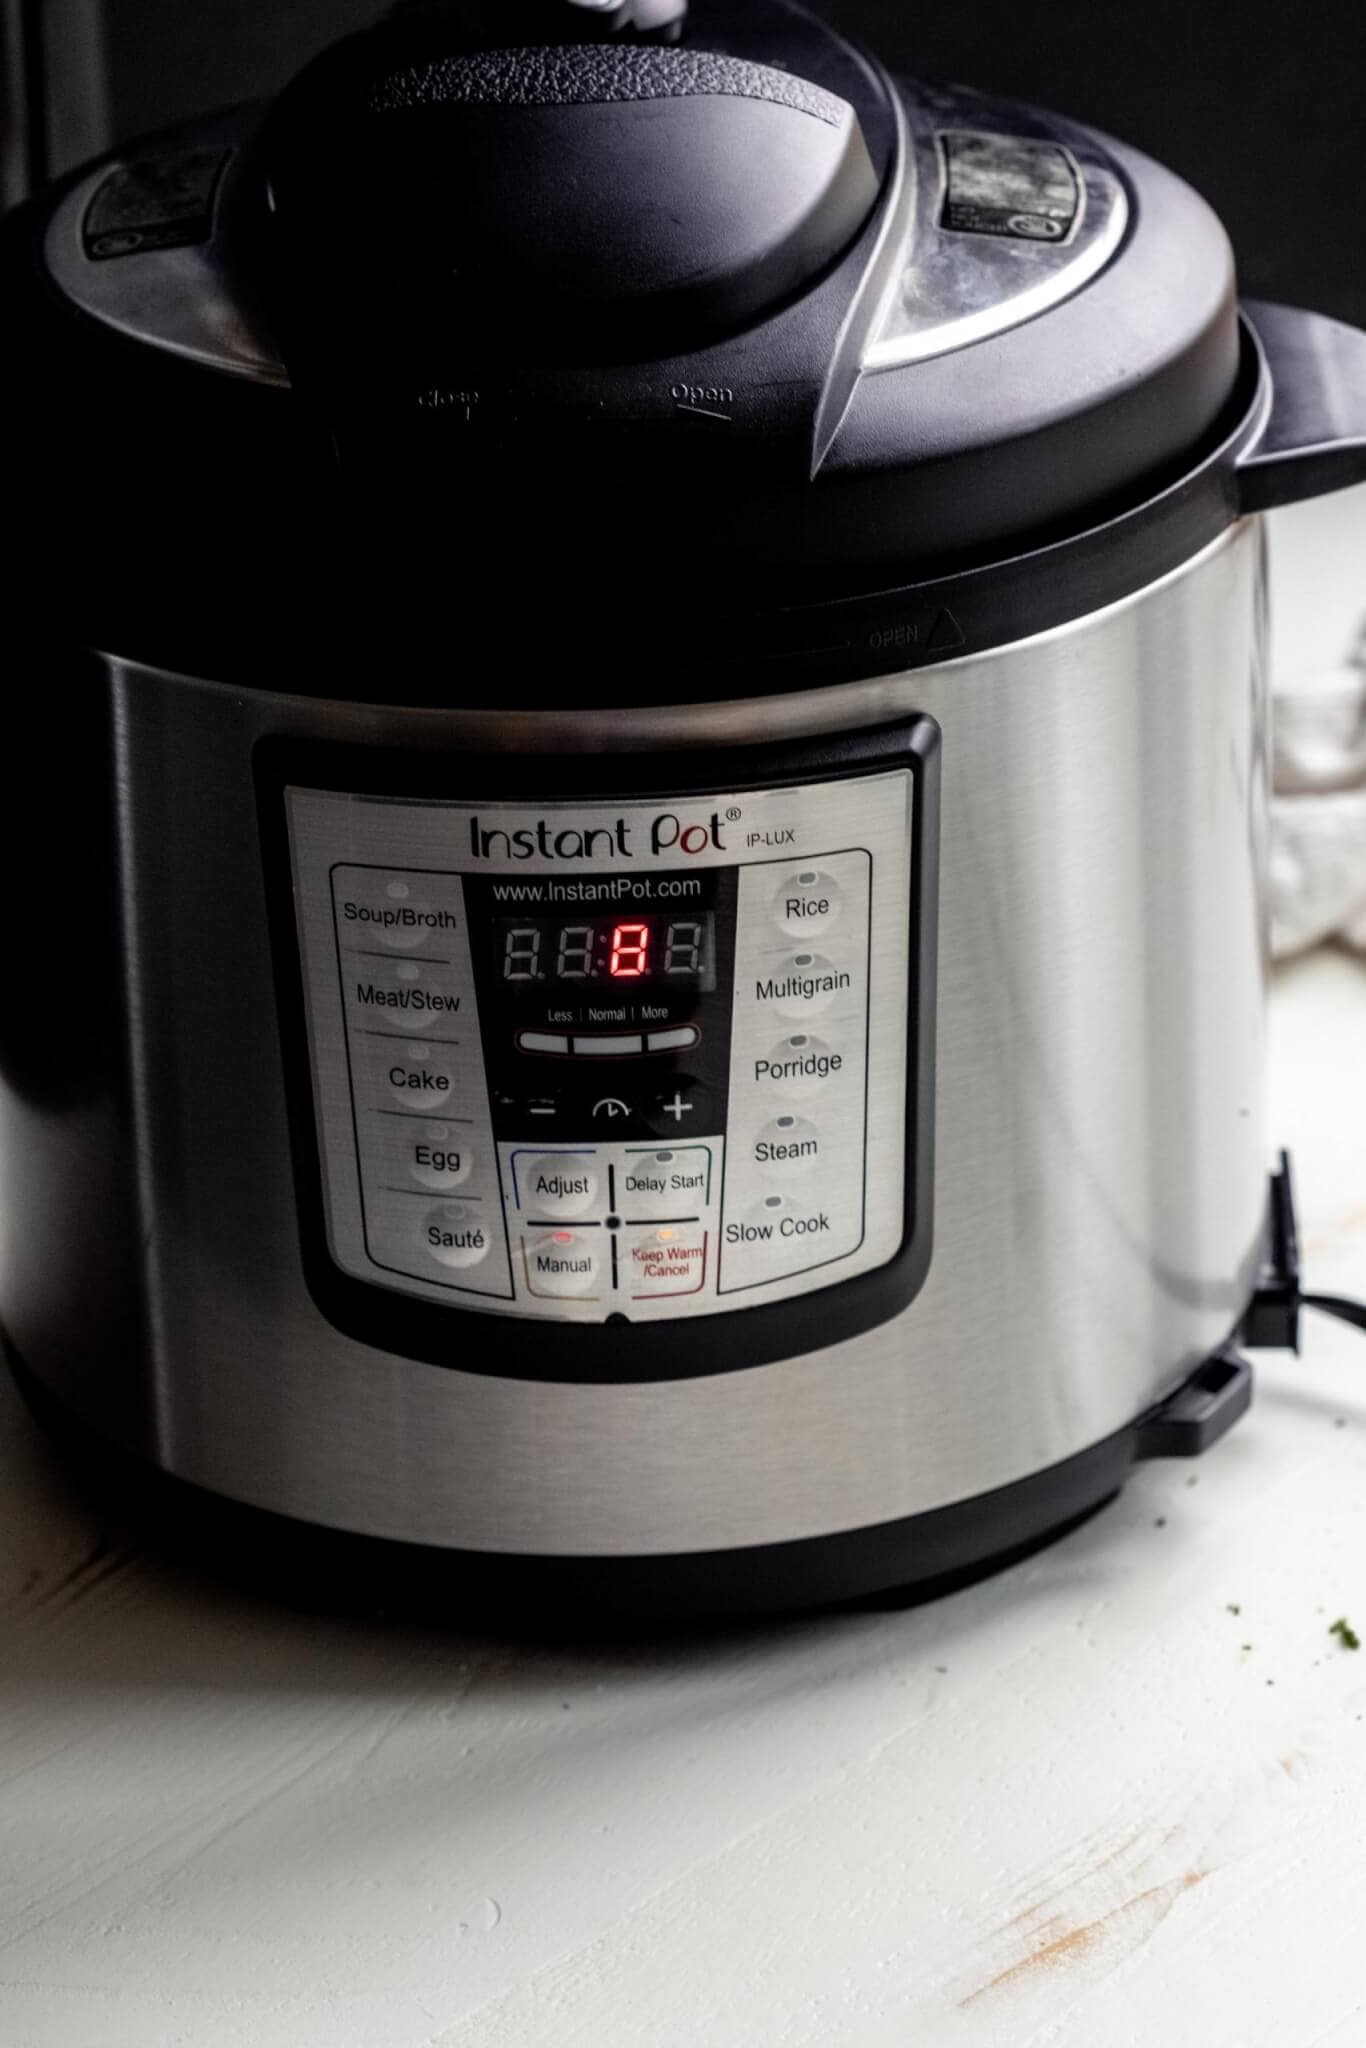 Instant pot with lid on and cook time set to 8 minutes.